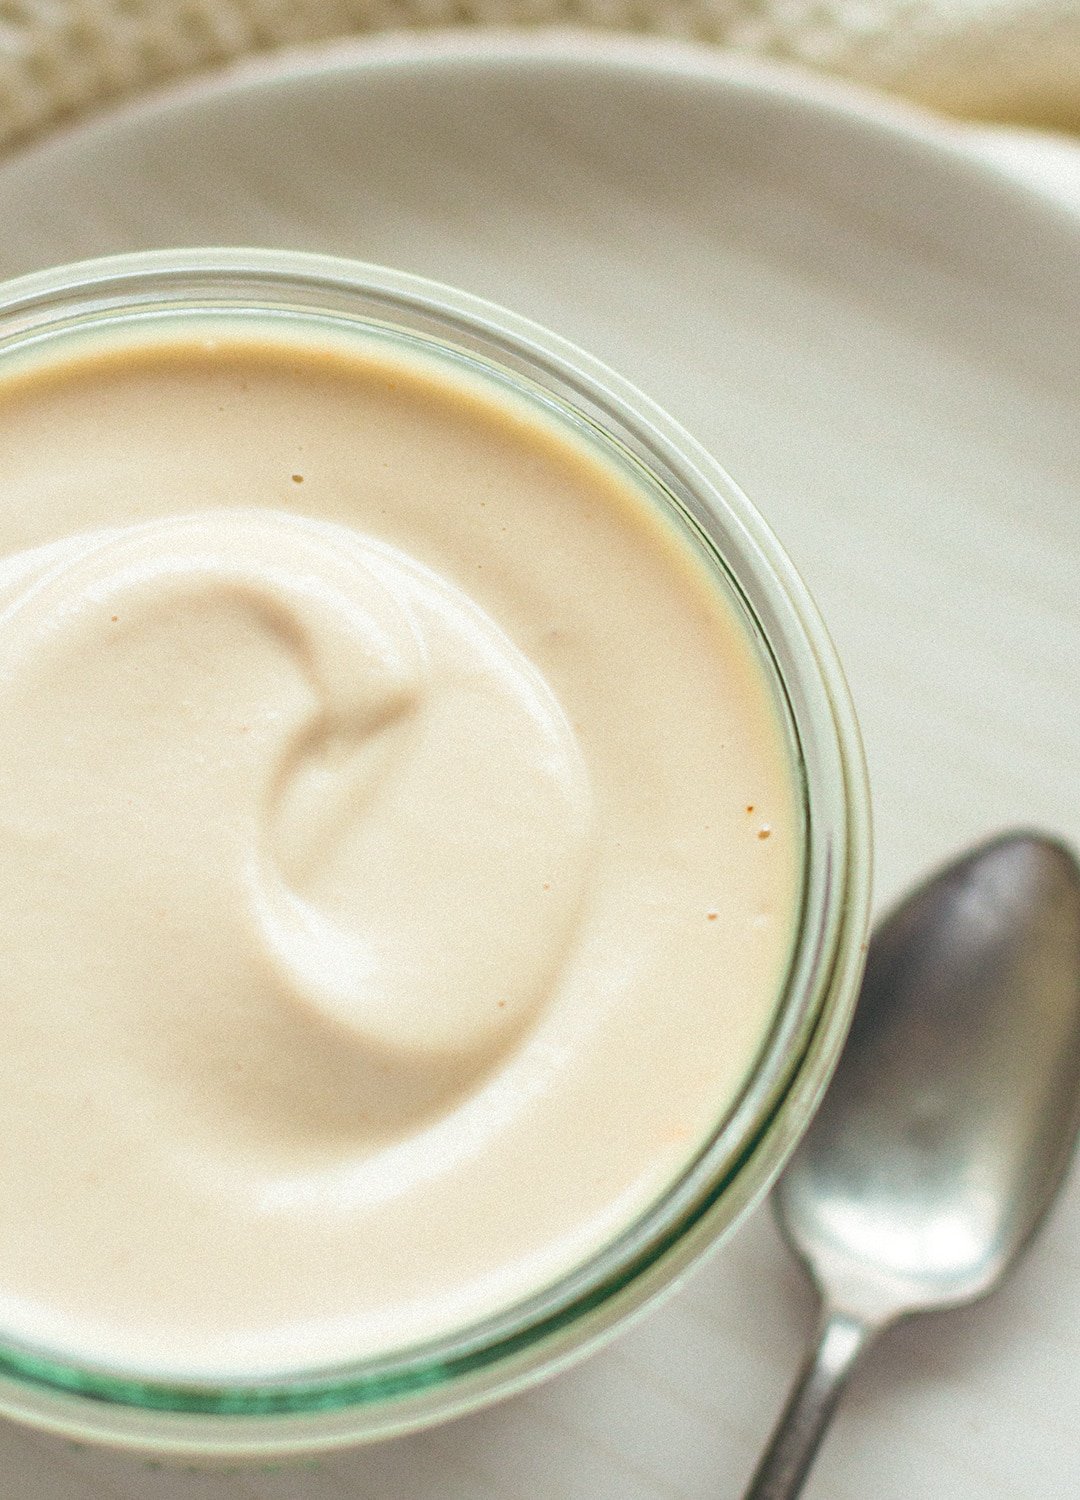 Sweet Cashew Cream - raw vegan and delicious! You'll love this recipe, it's super versatile! It's incredible how similar it is to dairy cream. | thehealthfulideas.com